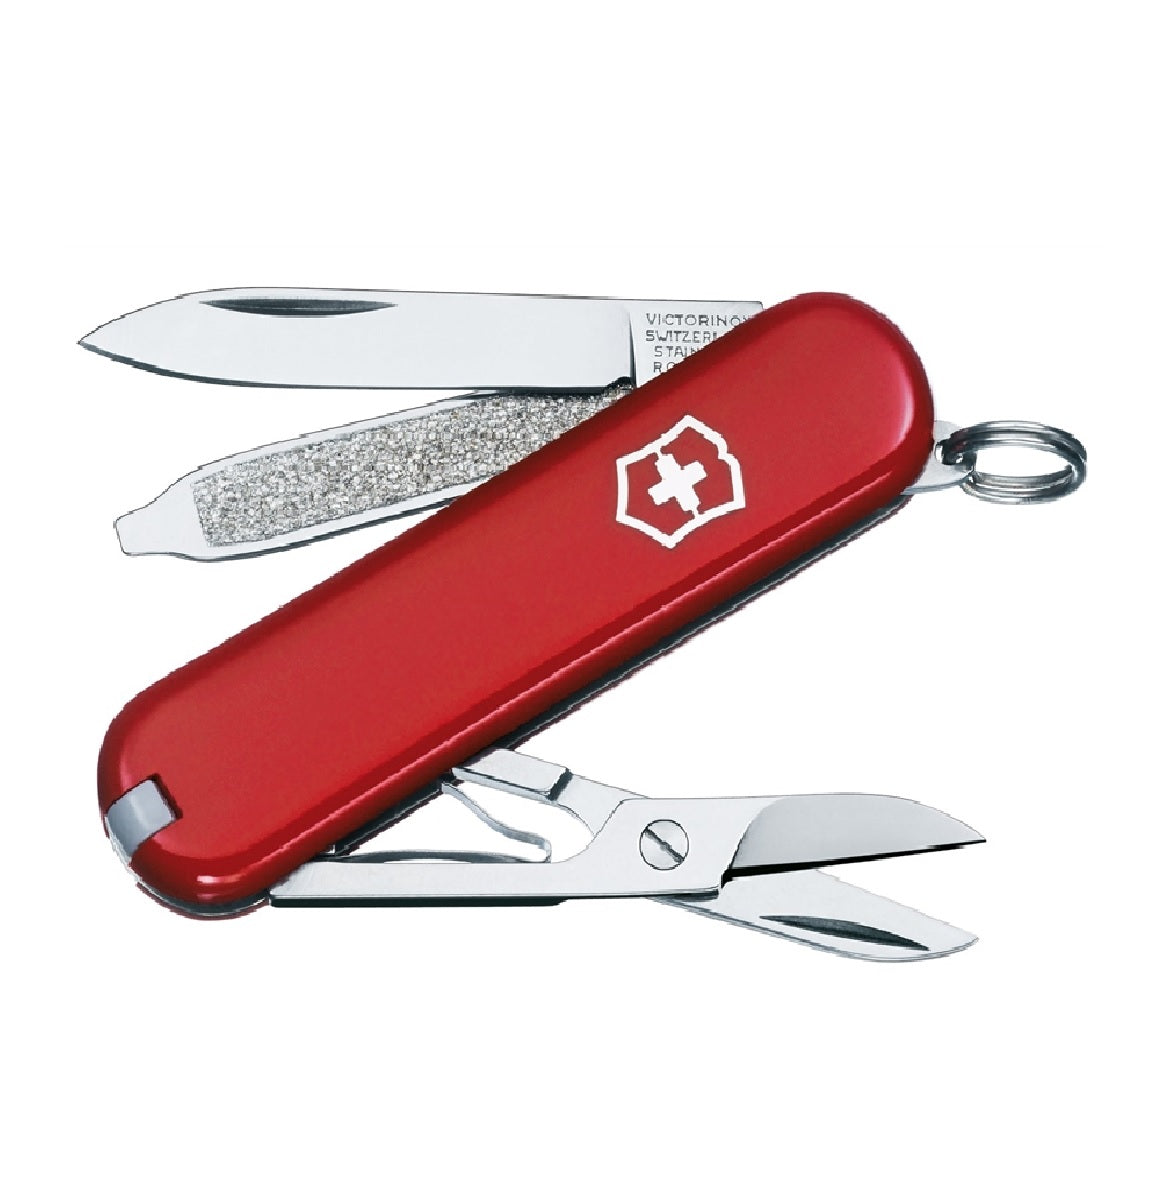 Swiss Army 0.6223-033-X3 Multi-Tool Knife, Red Handle